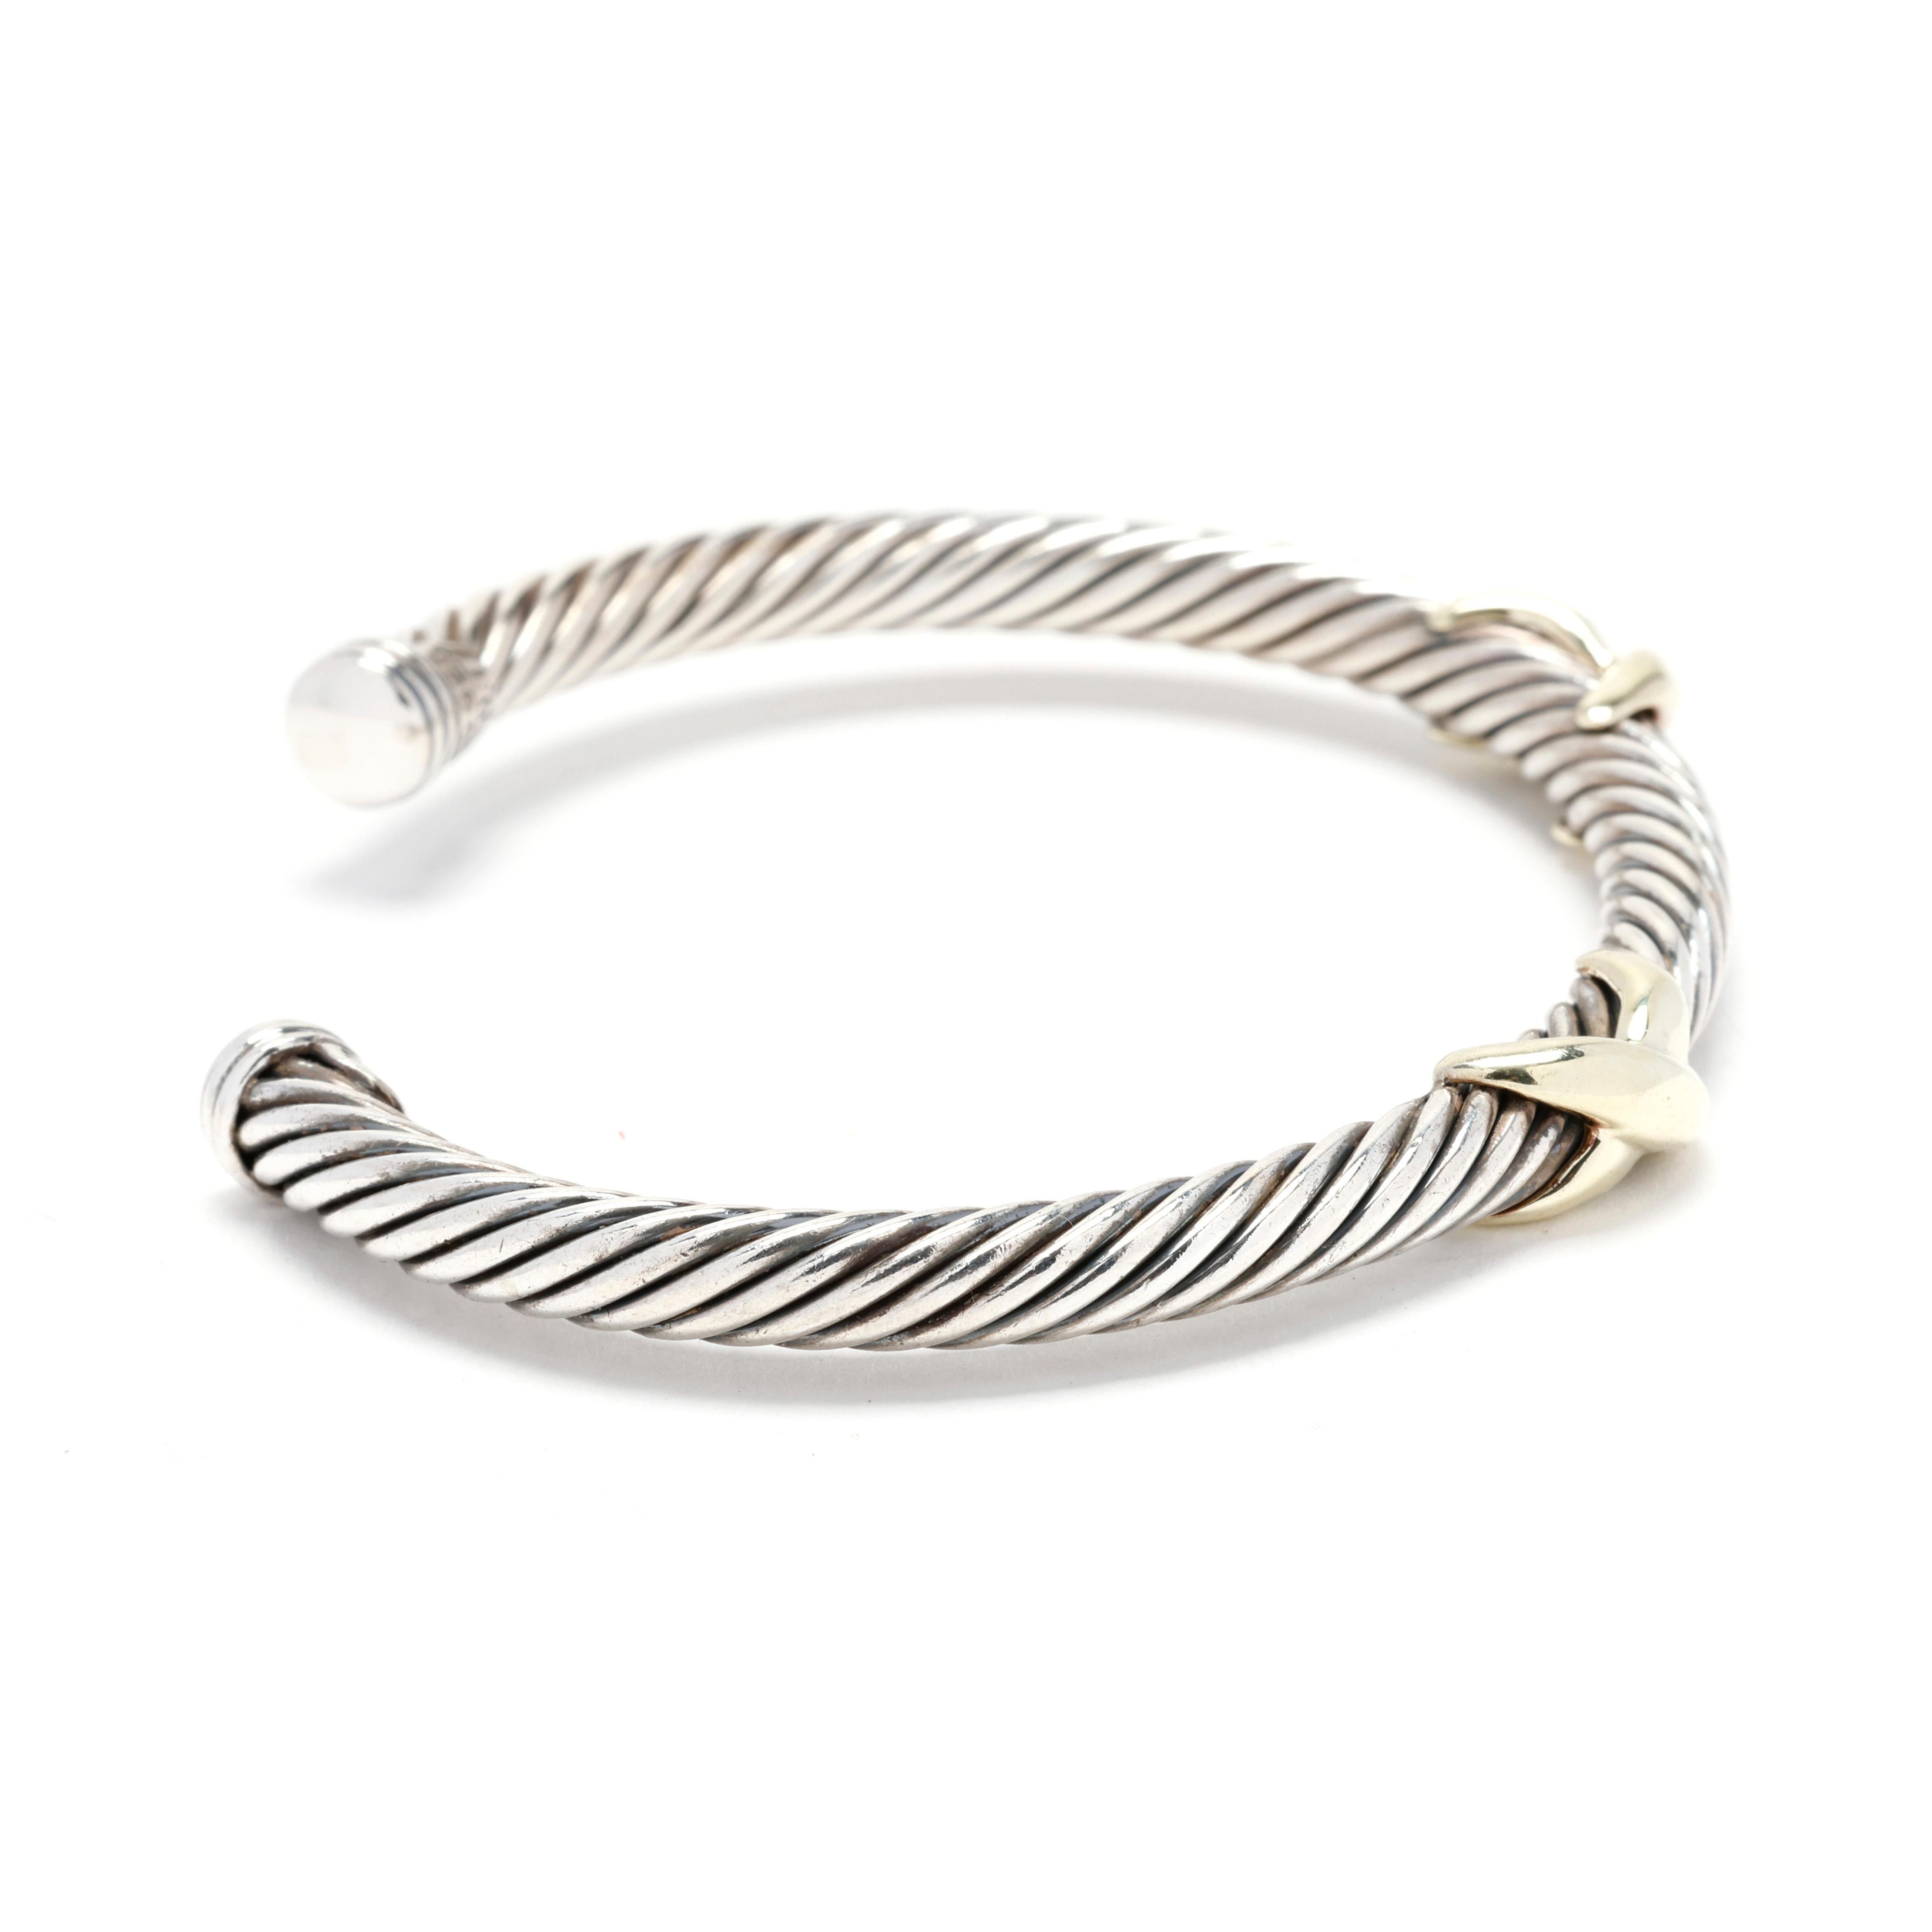 A David Yurman sterling silver 14 karat yellow gold and sterling silver double X cable cuff bracelet. This cuff bracelet features a silver cable motif cuff with a gold double X accent.



Length: 6.25 in.; adjustable



DY Size Medium



Width: 6.9